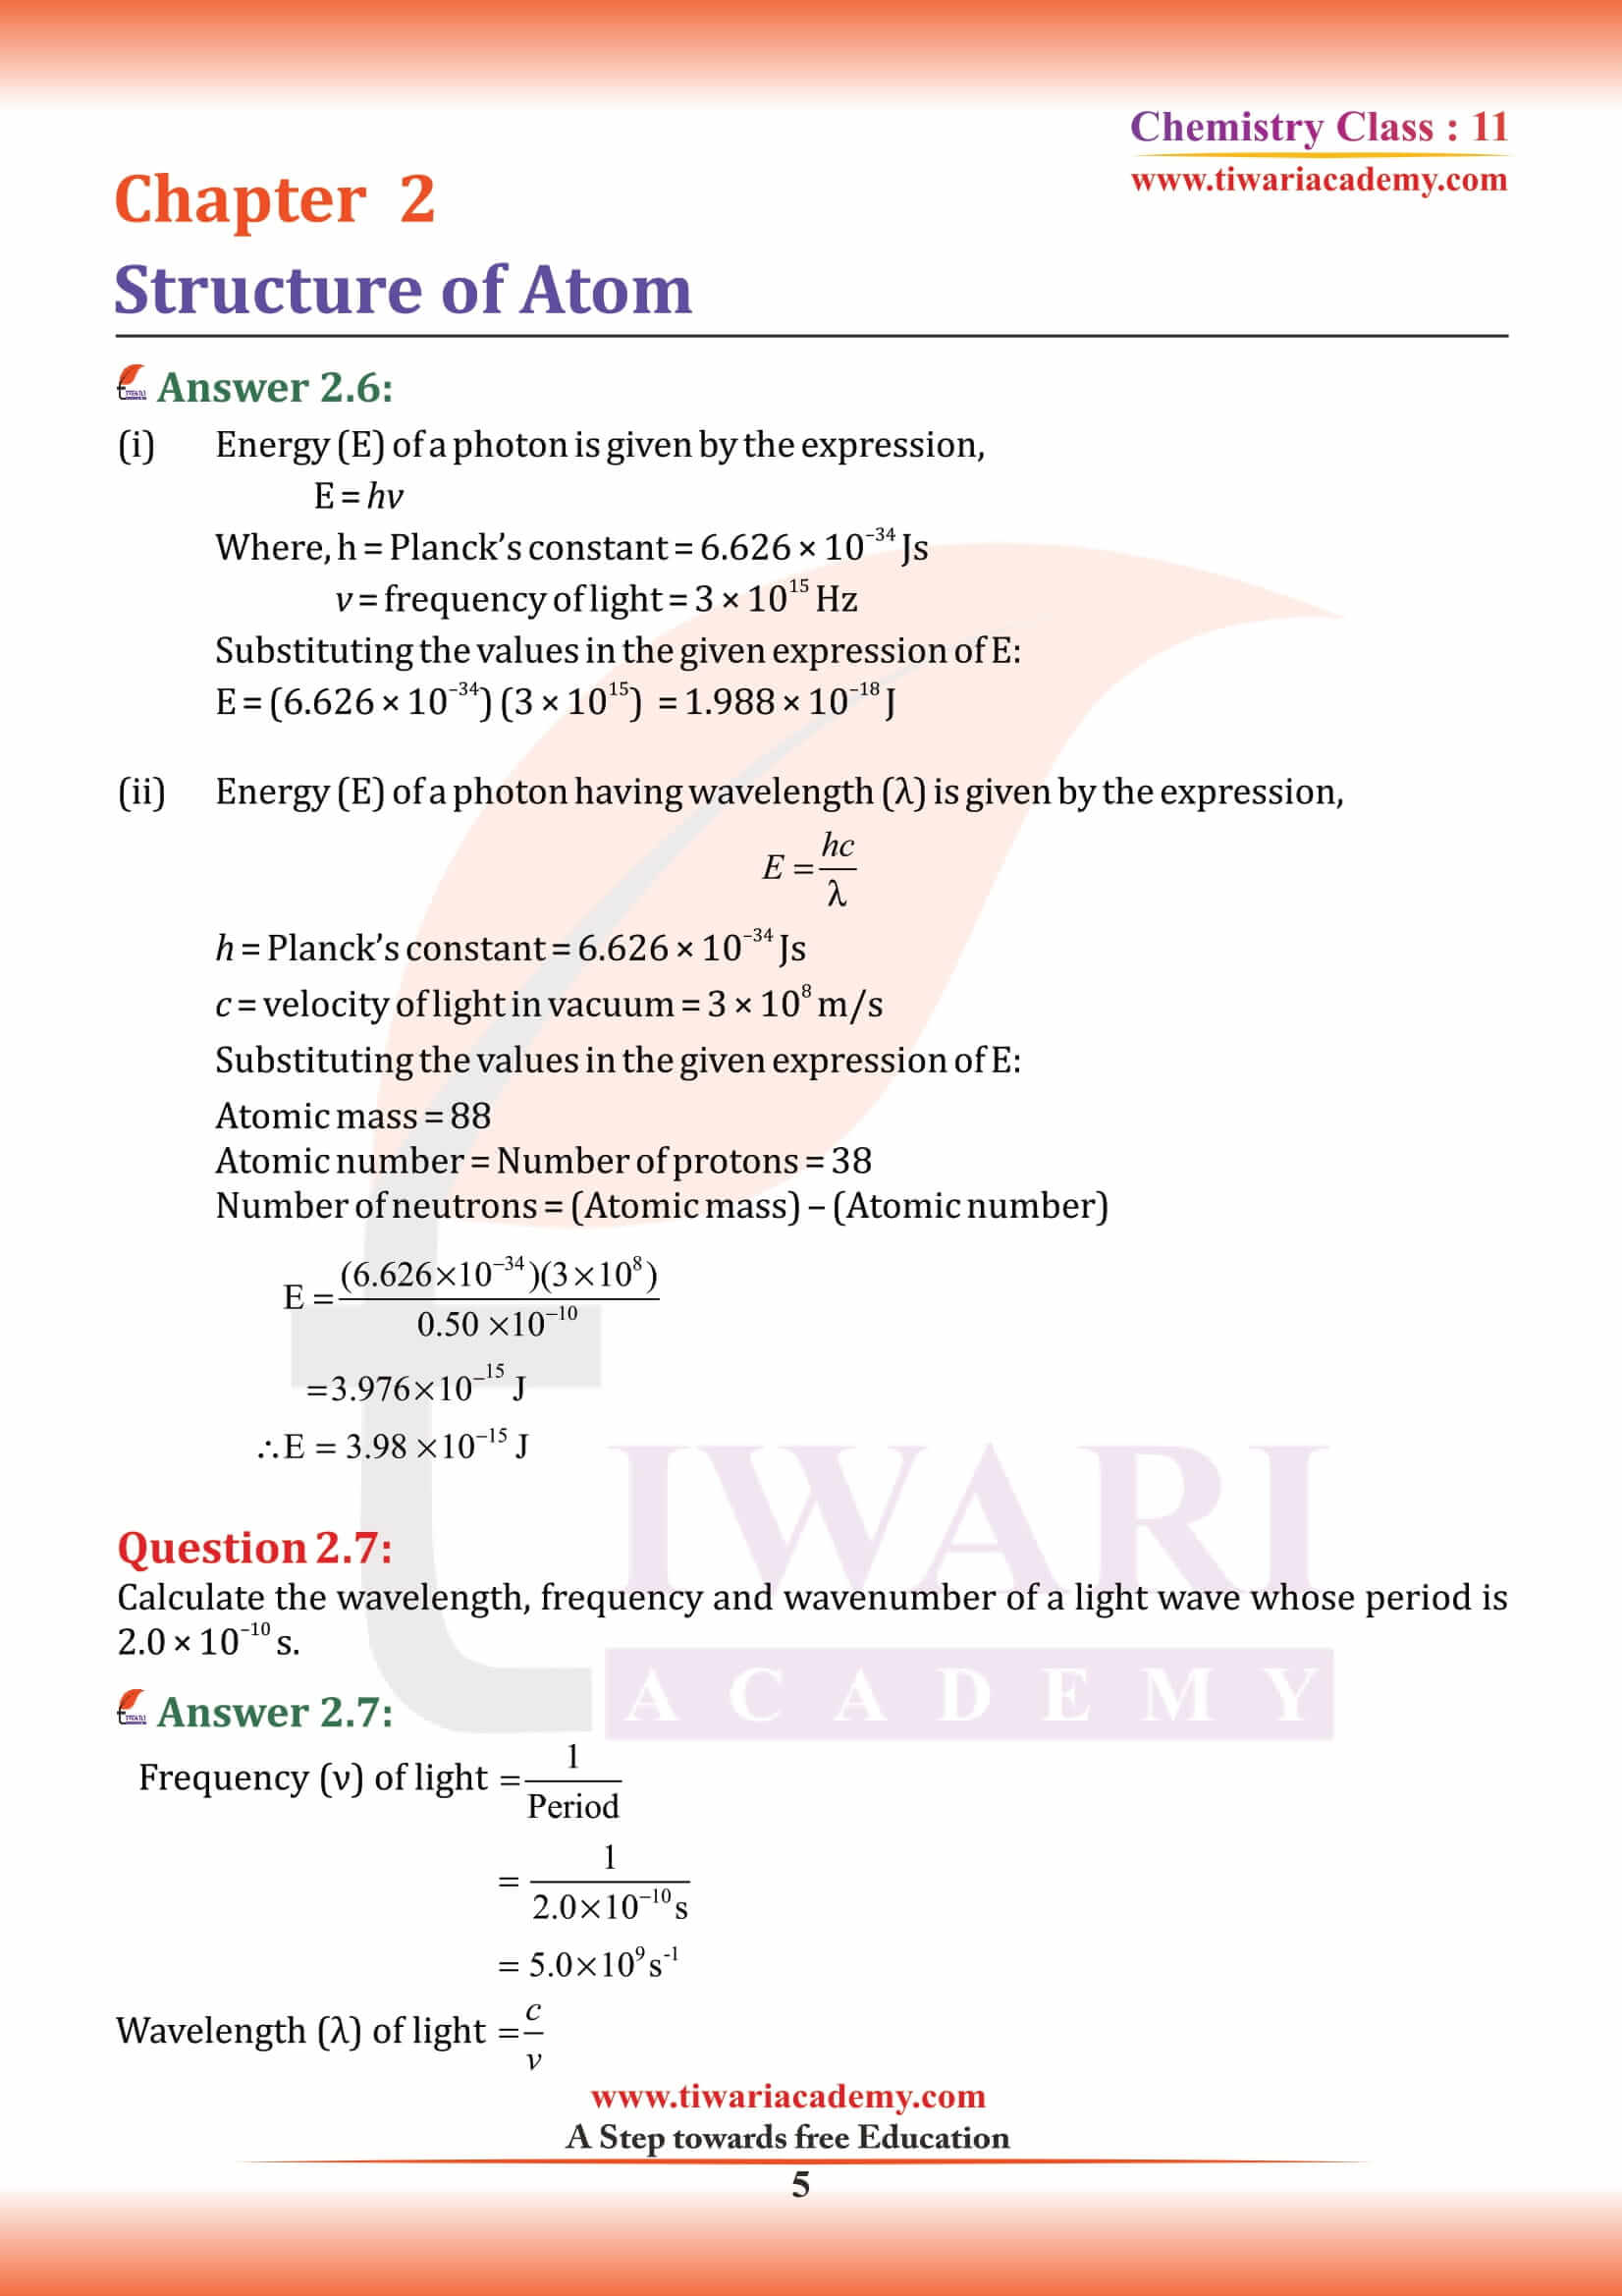 NCERT Solutions for Class 11 Chemistry Chapter 2 download